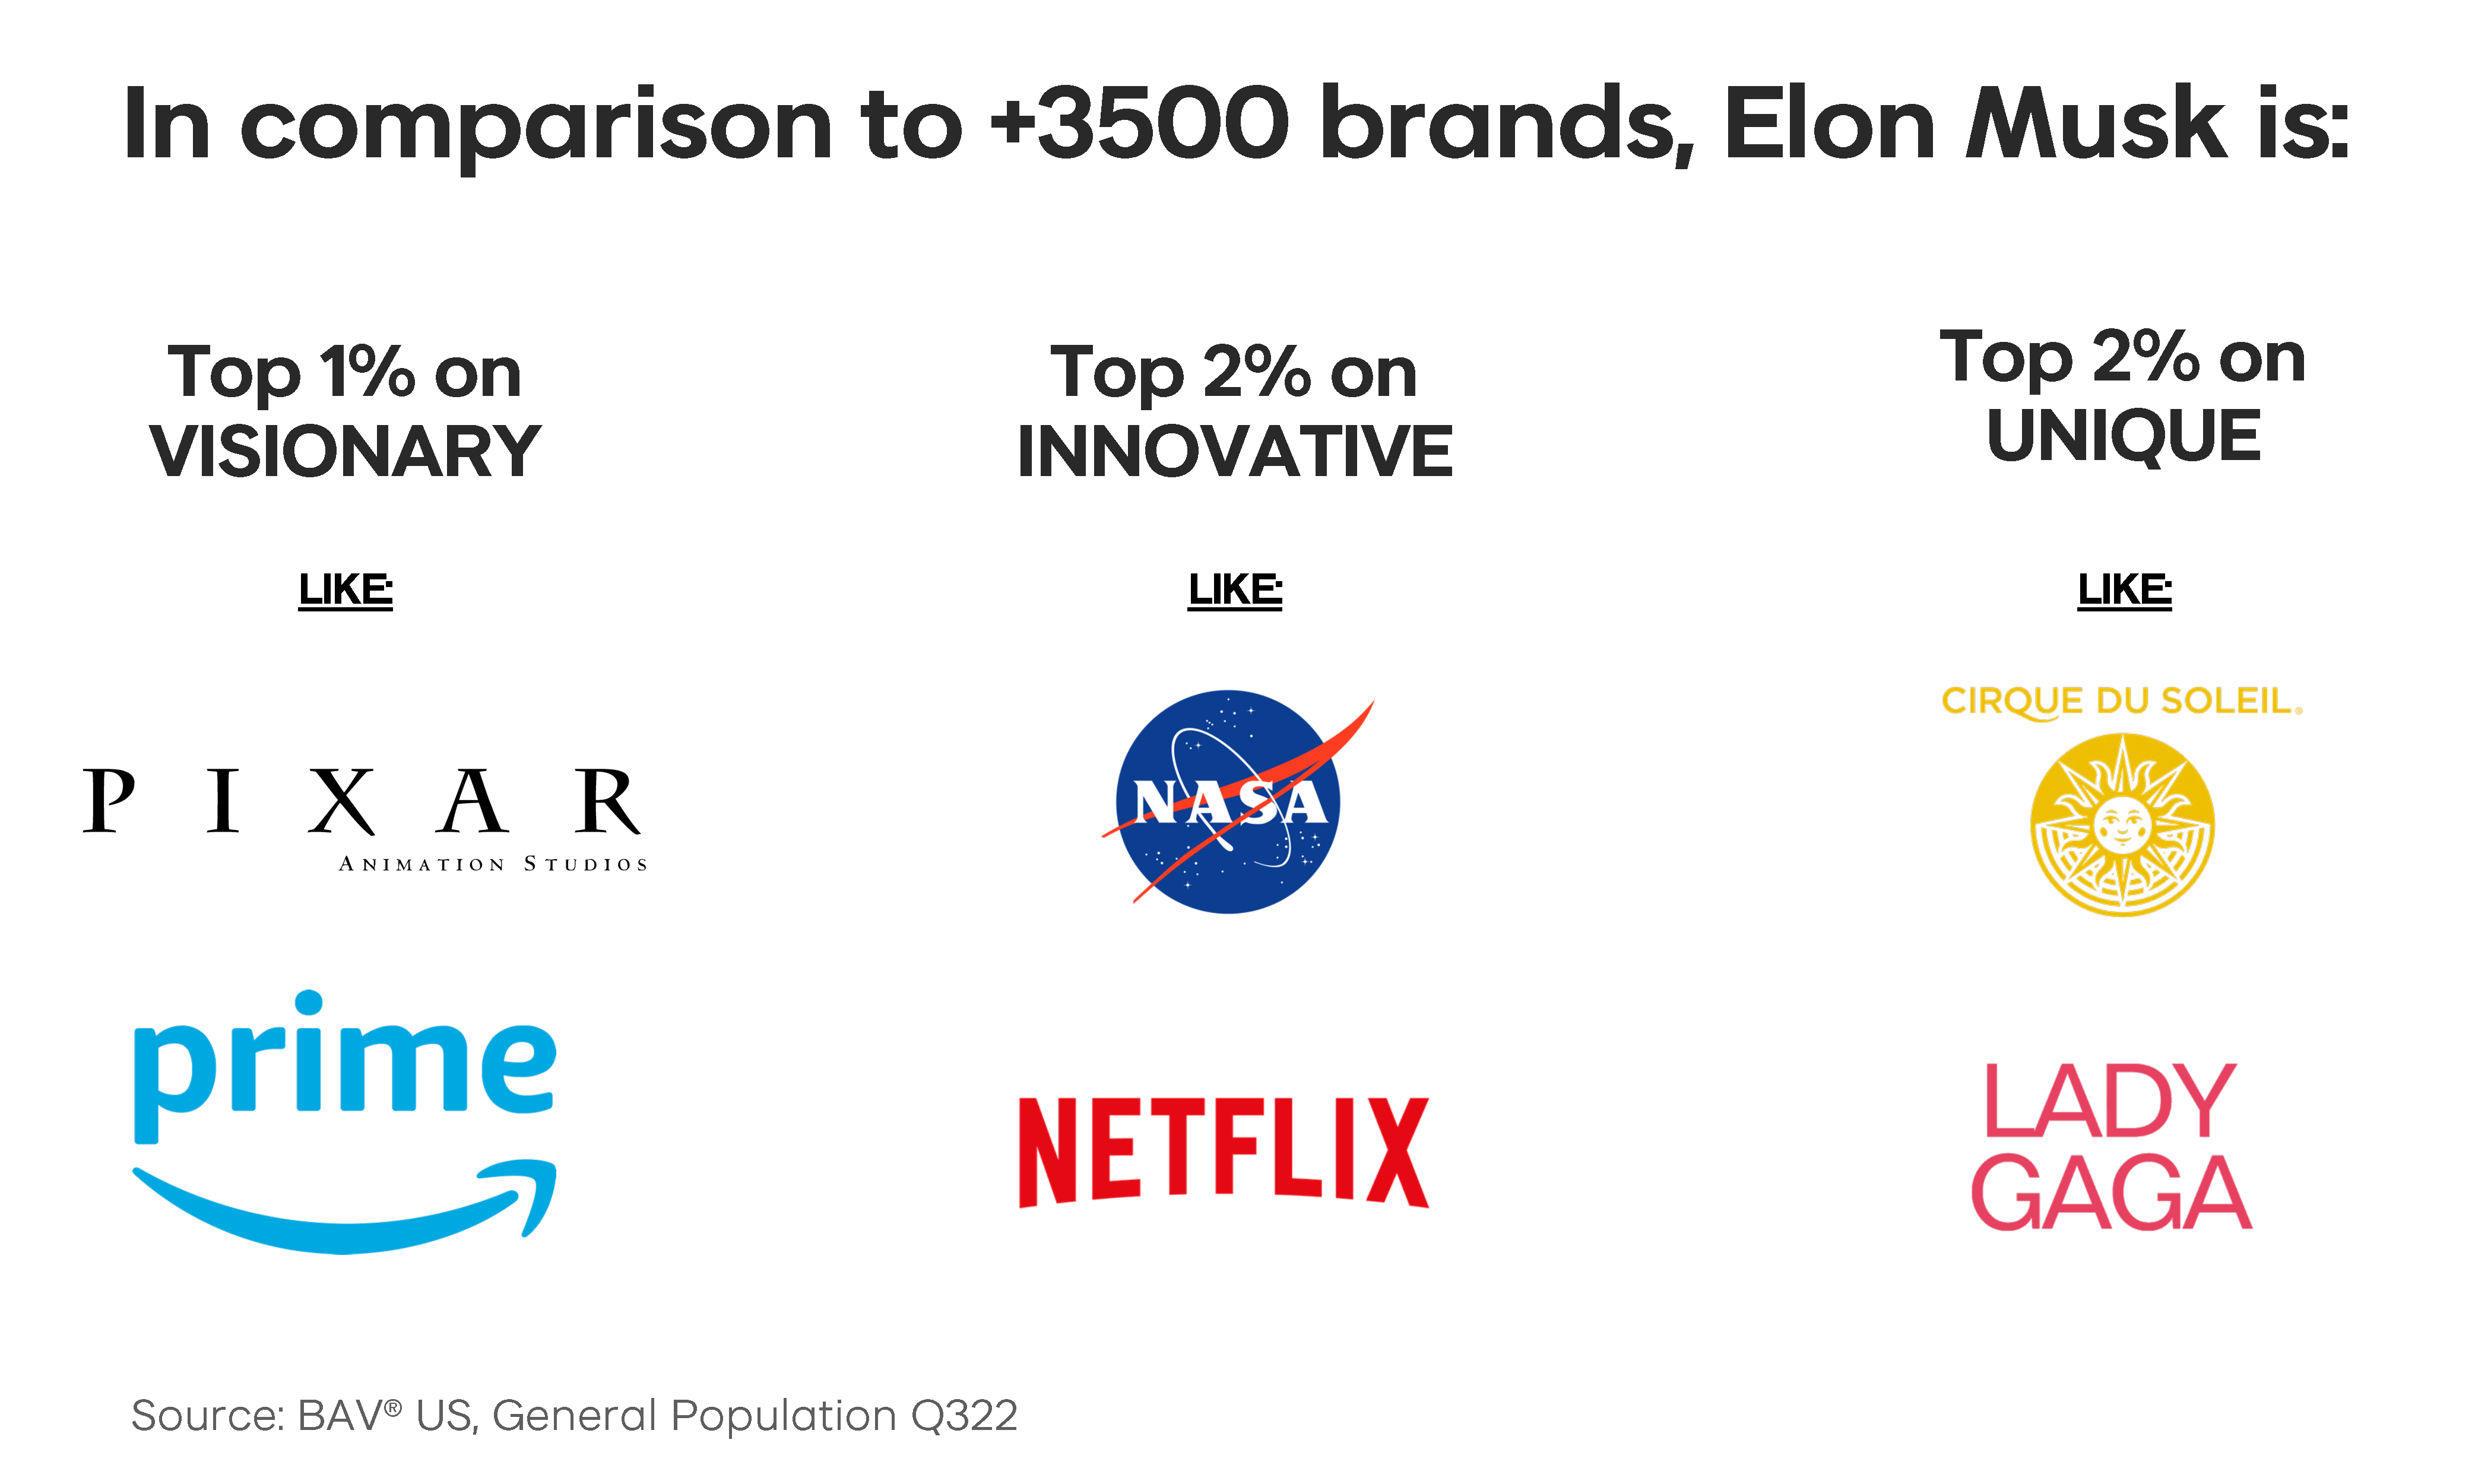 In comparison to +3500 brands, Elon Musk is top 1% for visionary and top 2% for innovative and unique